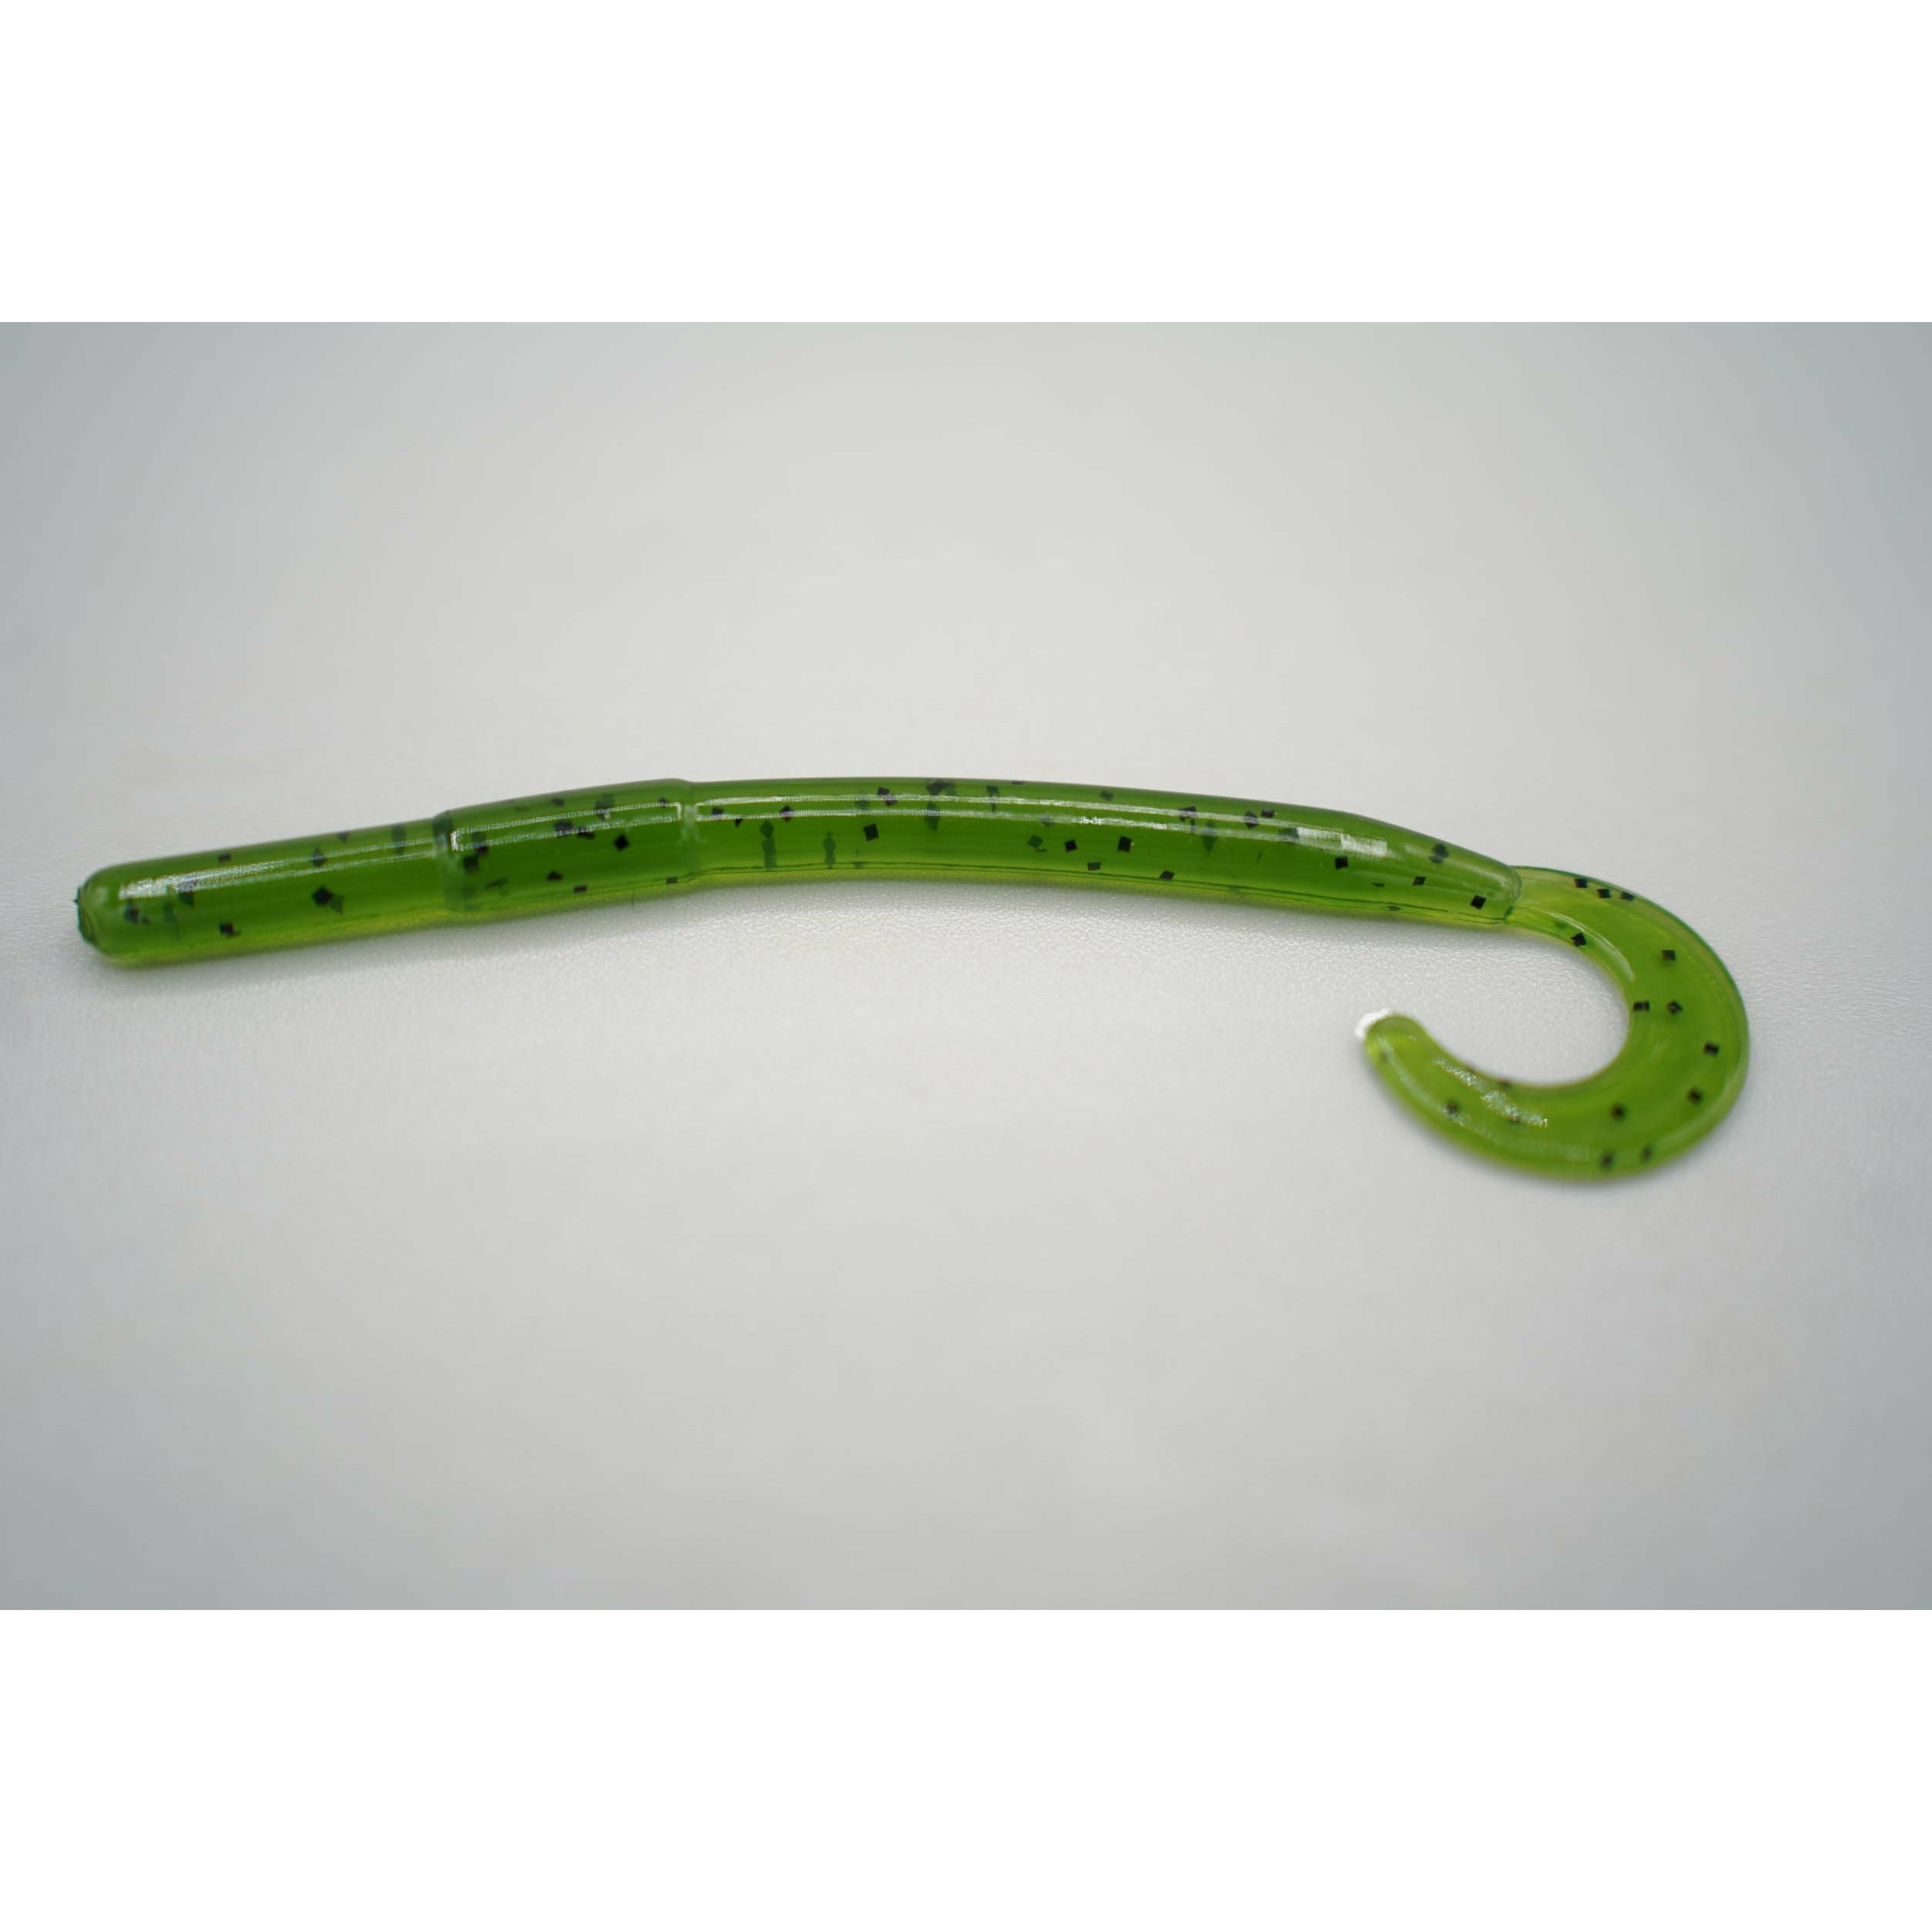 Buy Soft Plastic Worms Online, Bass Fishing Accessories, Soft Plastics Curly  Tail Worms